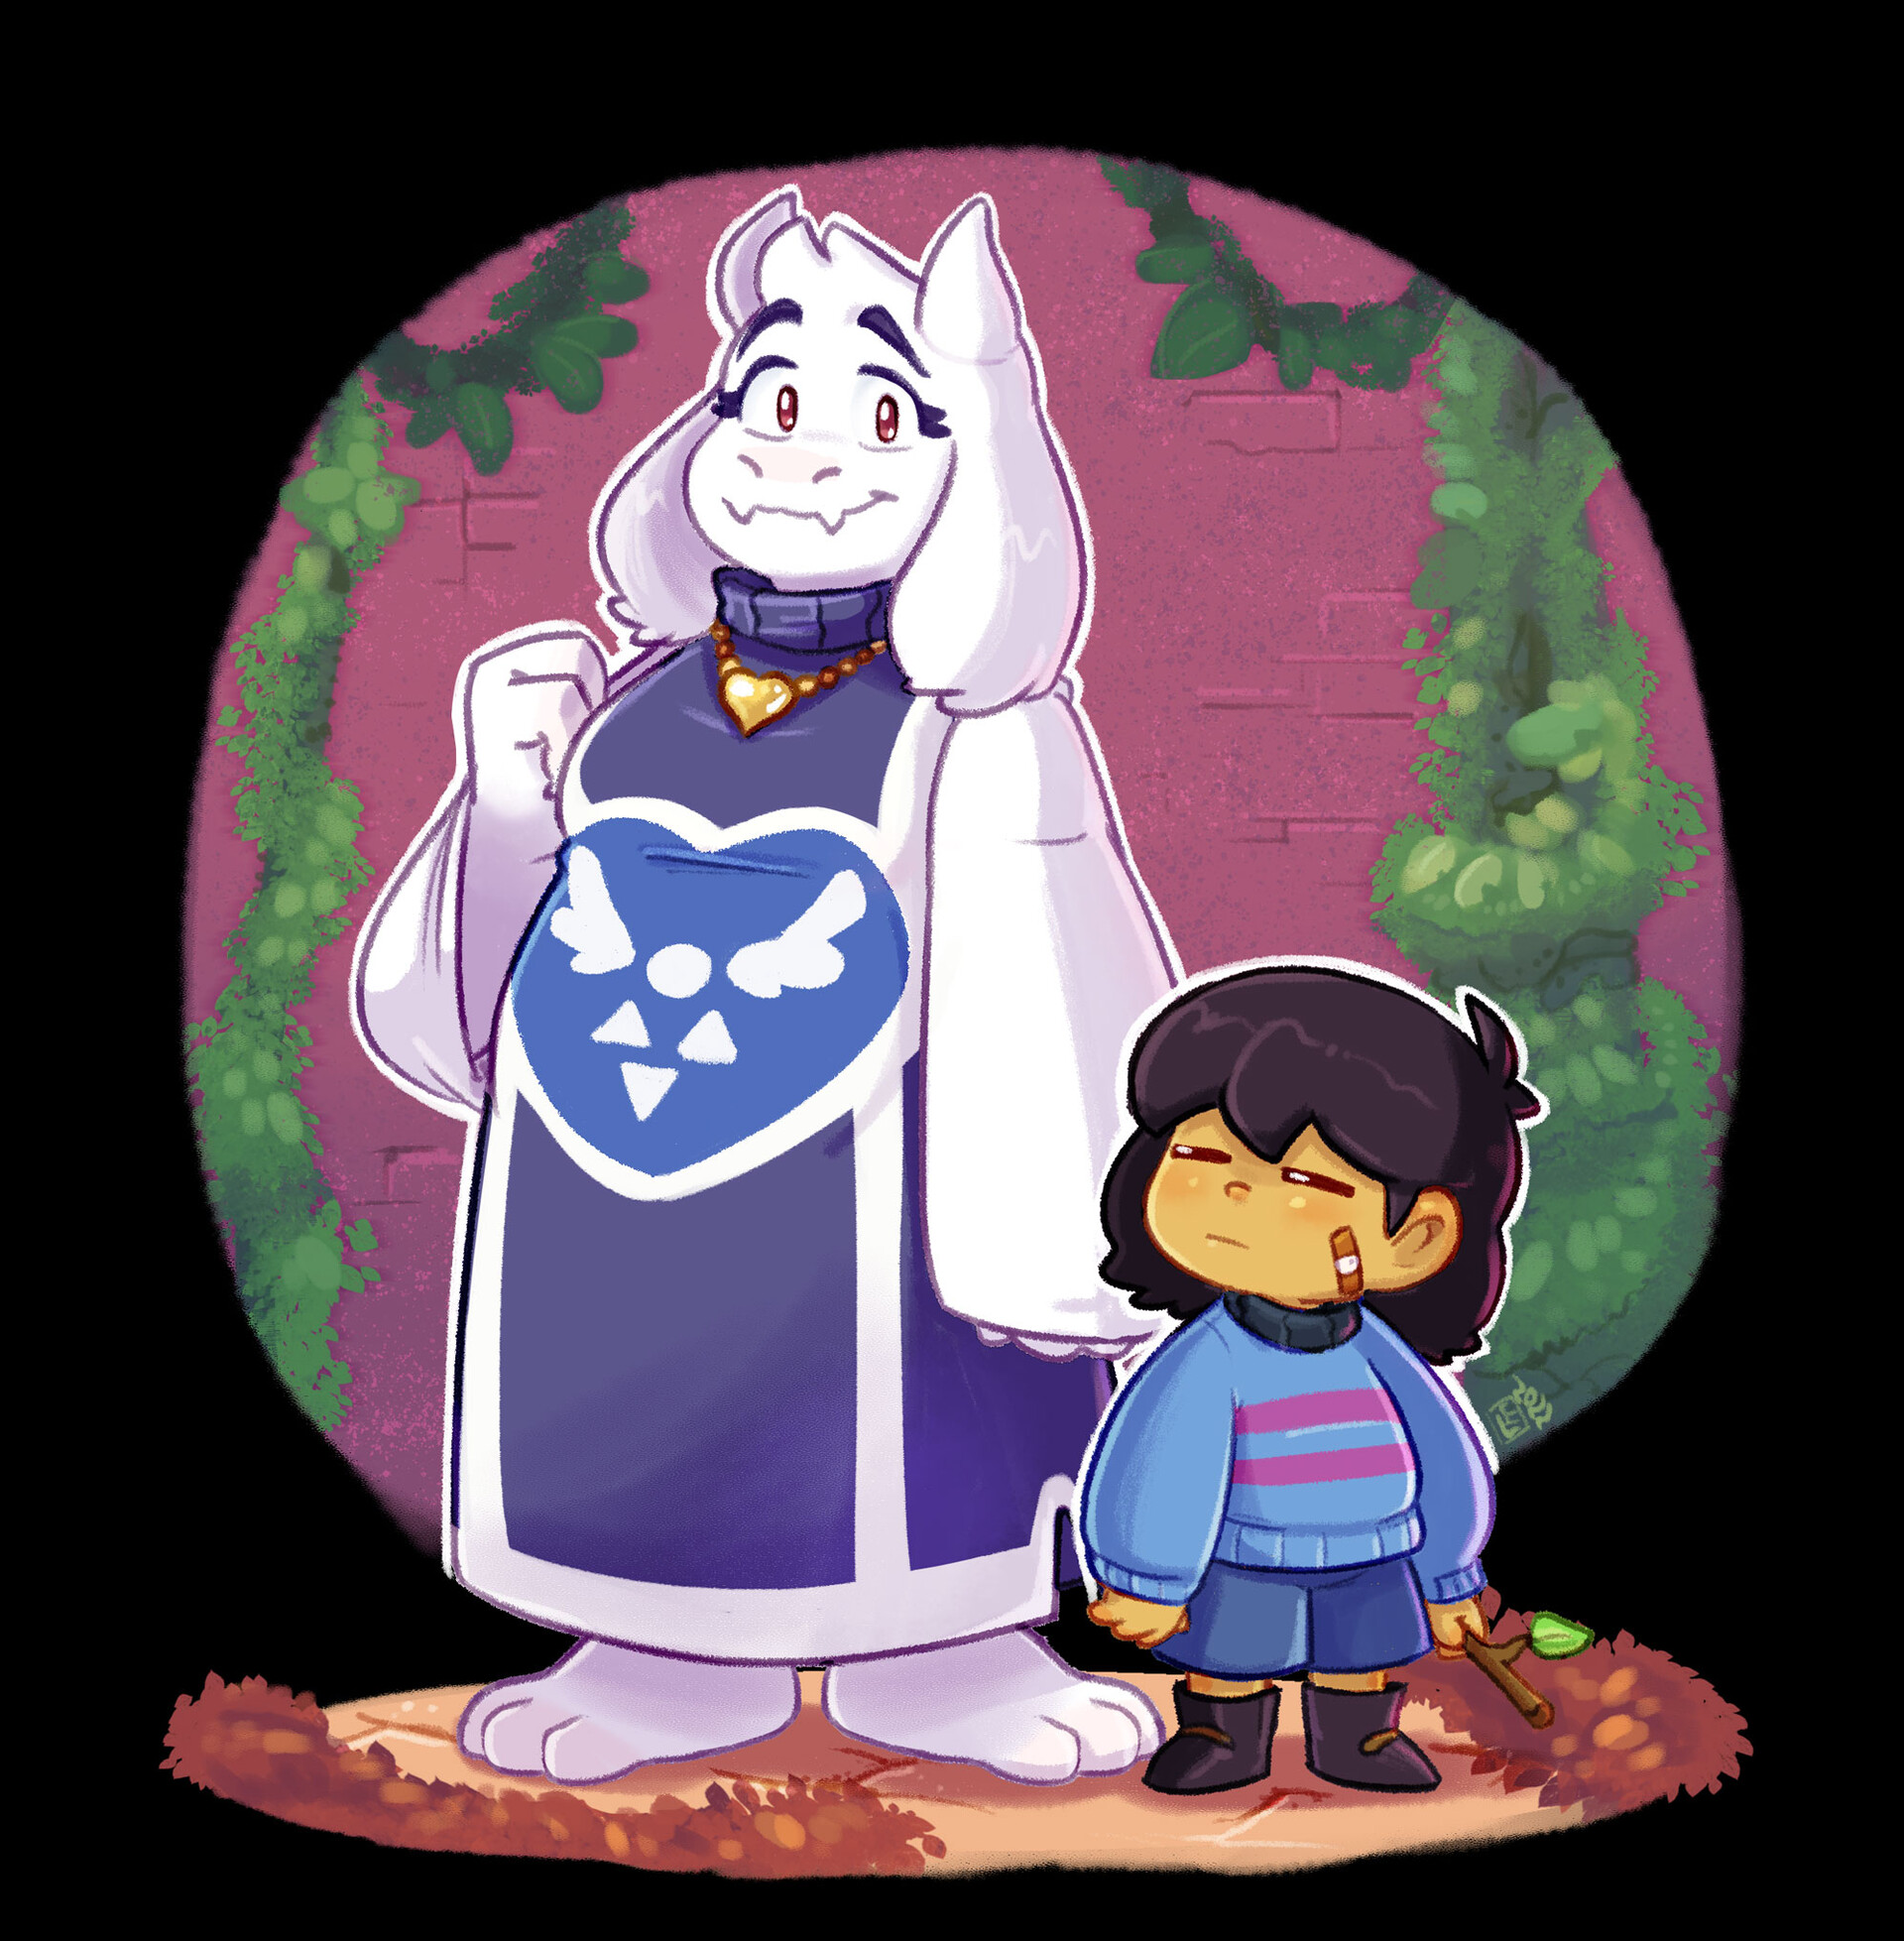 Undertale: Bits and Pieces